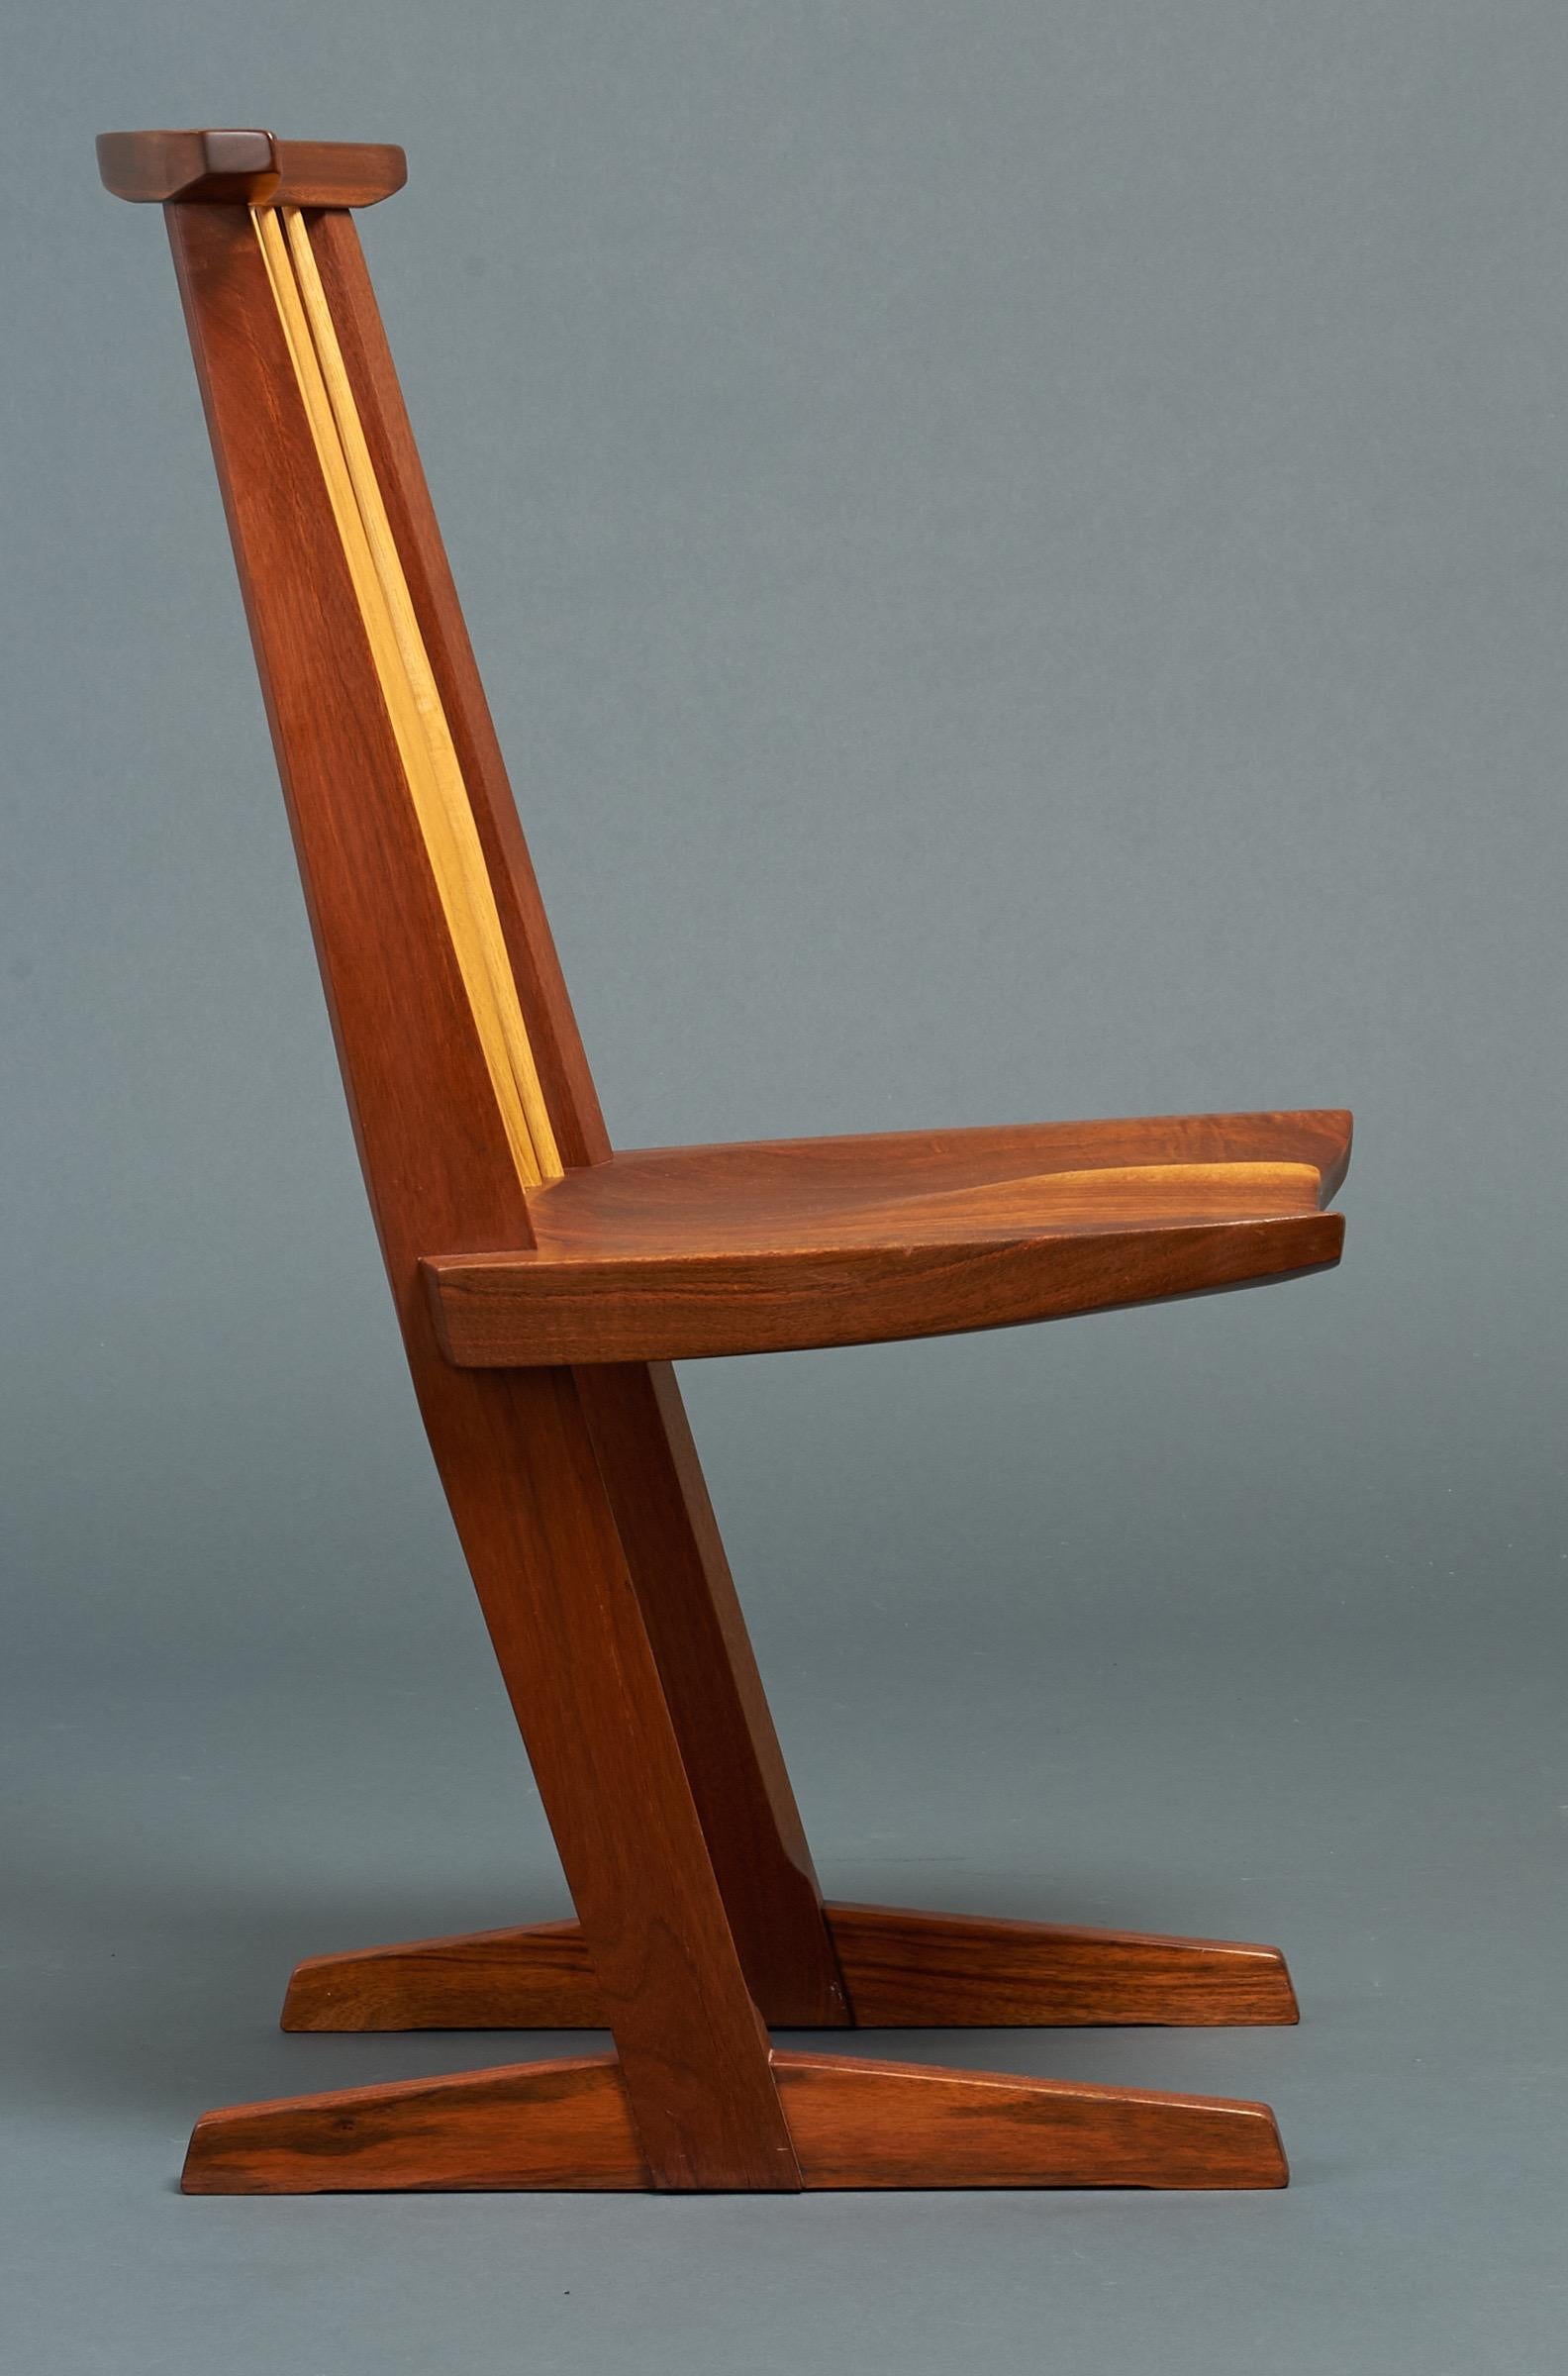 George Nakashima, Rare Sculptural Pair of Conoid Chairs in Walnut, Signed, 1989 For Sale 3